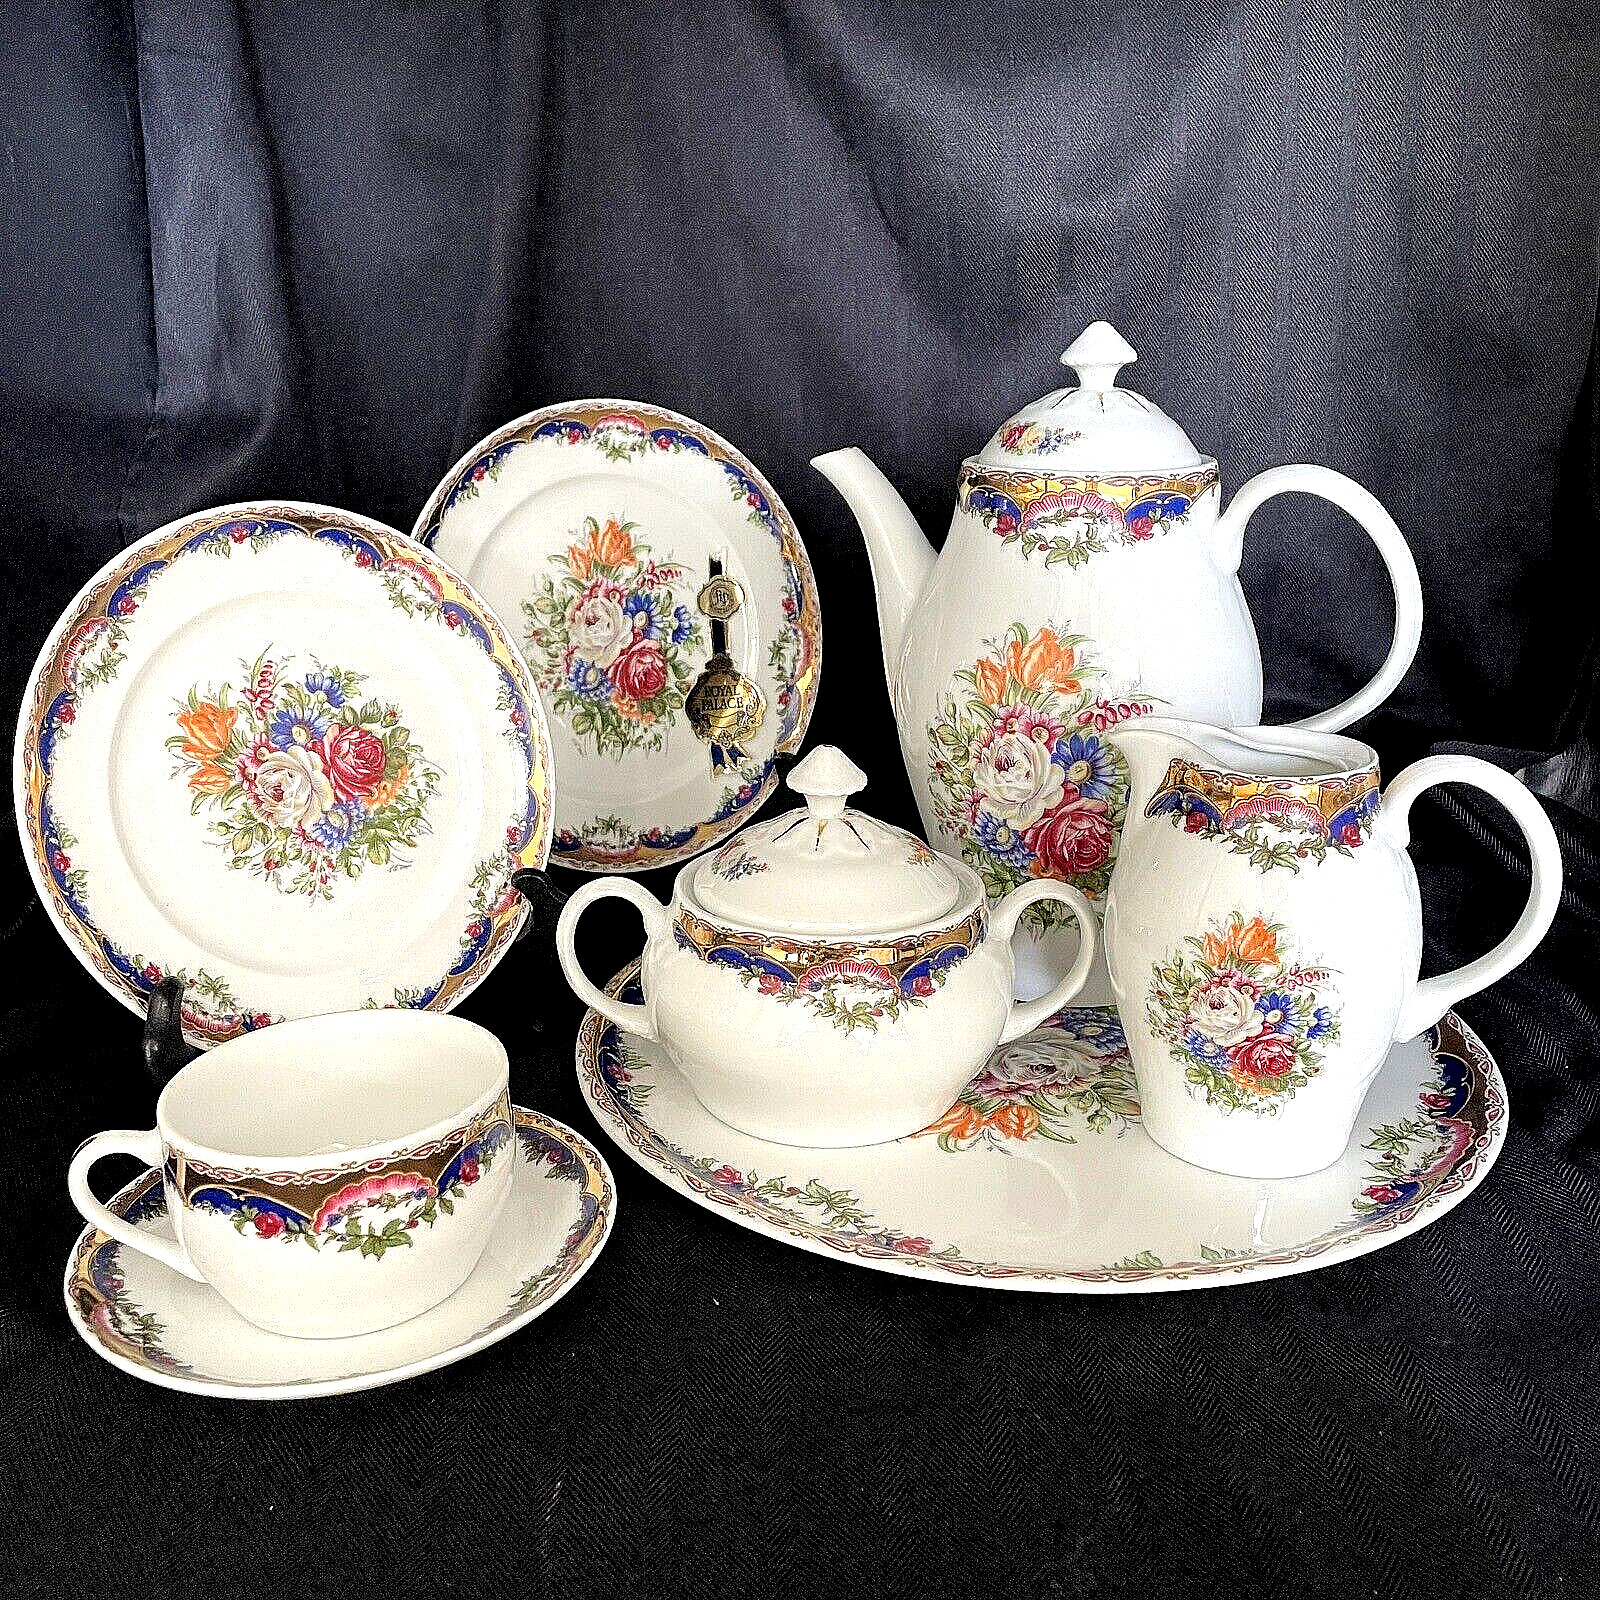 ROYAL PALACE COFFEE SERVICE - 44 PIECES